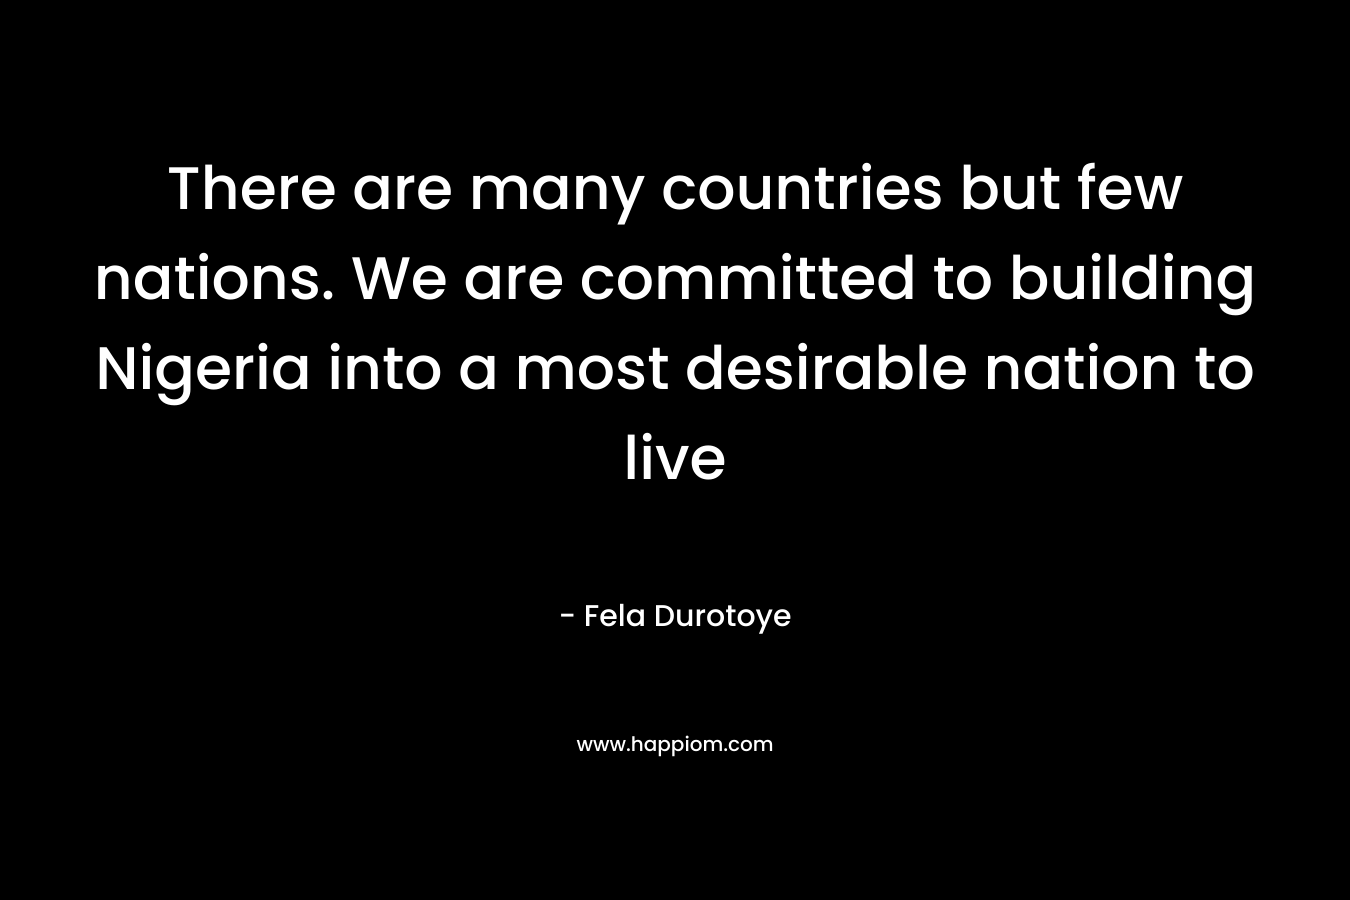 There are many countries but few nations. We are committed to building Nigeria into a most desirable nation to live